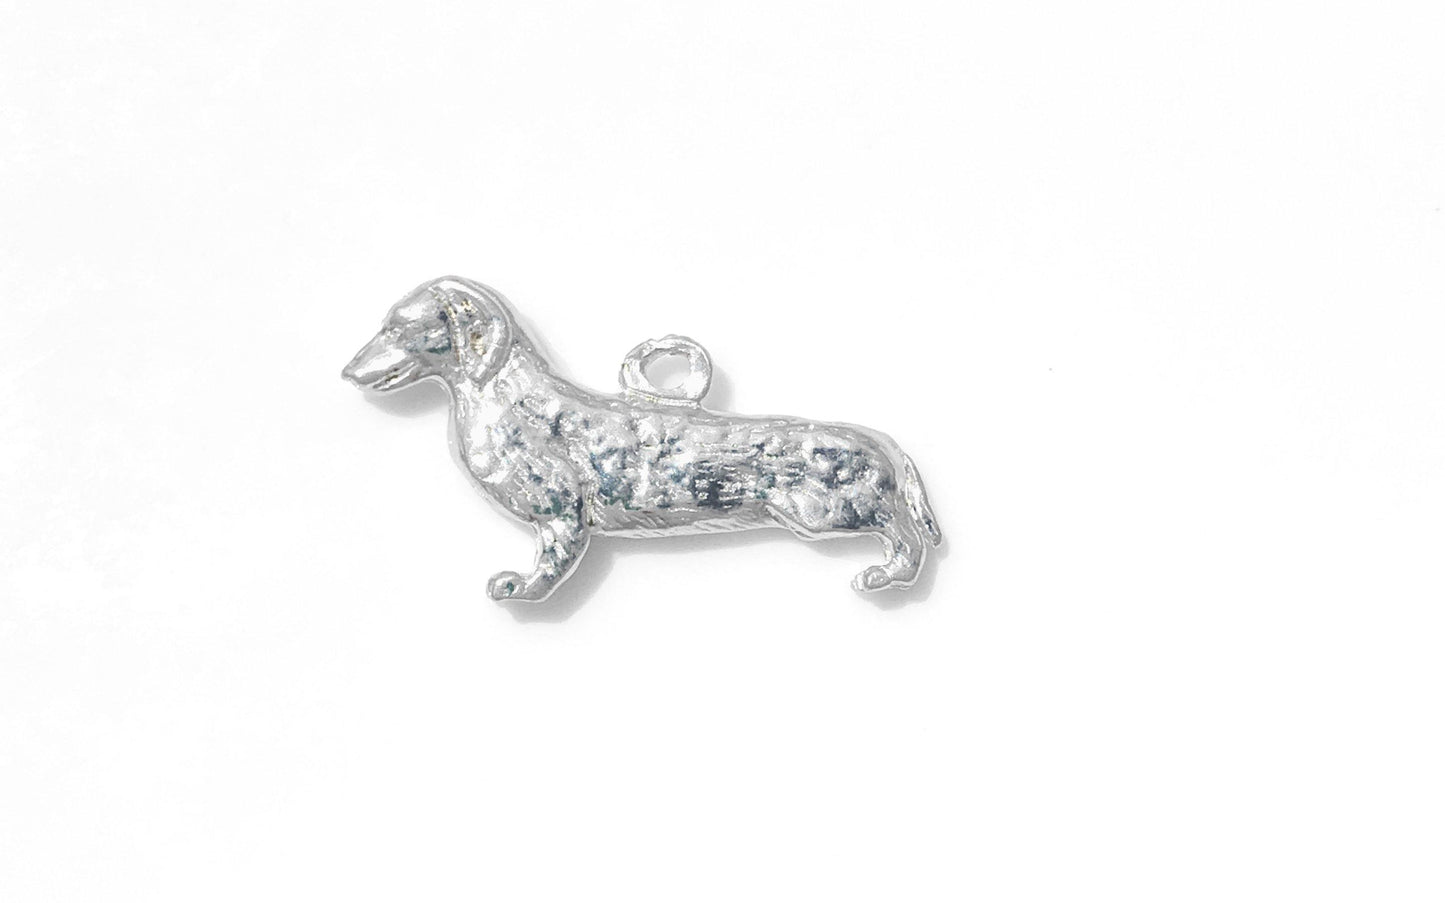 Handmade Pewter Dog Breed Charm Pendant Necklace Jewelry Womens Accessory - House of Morgan Pewter